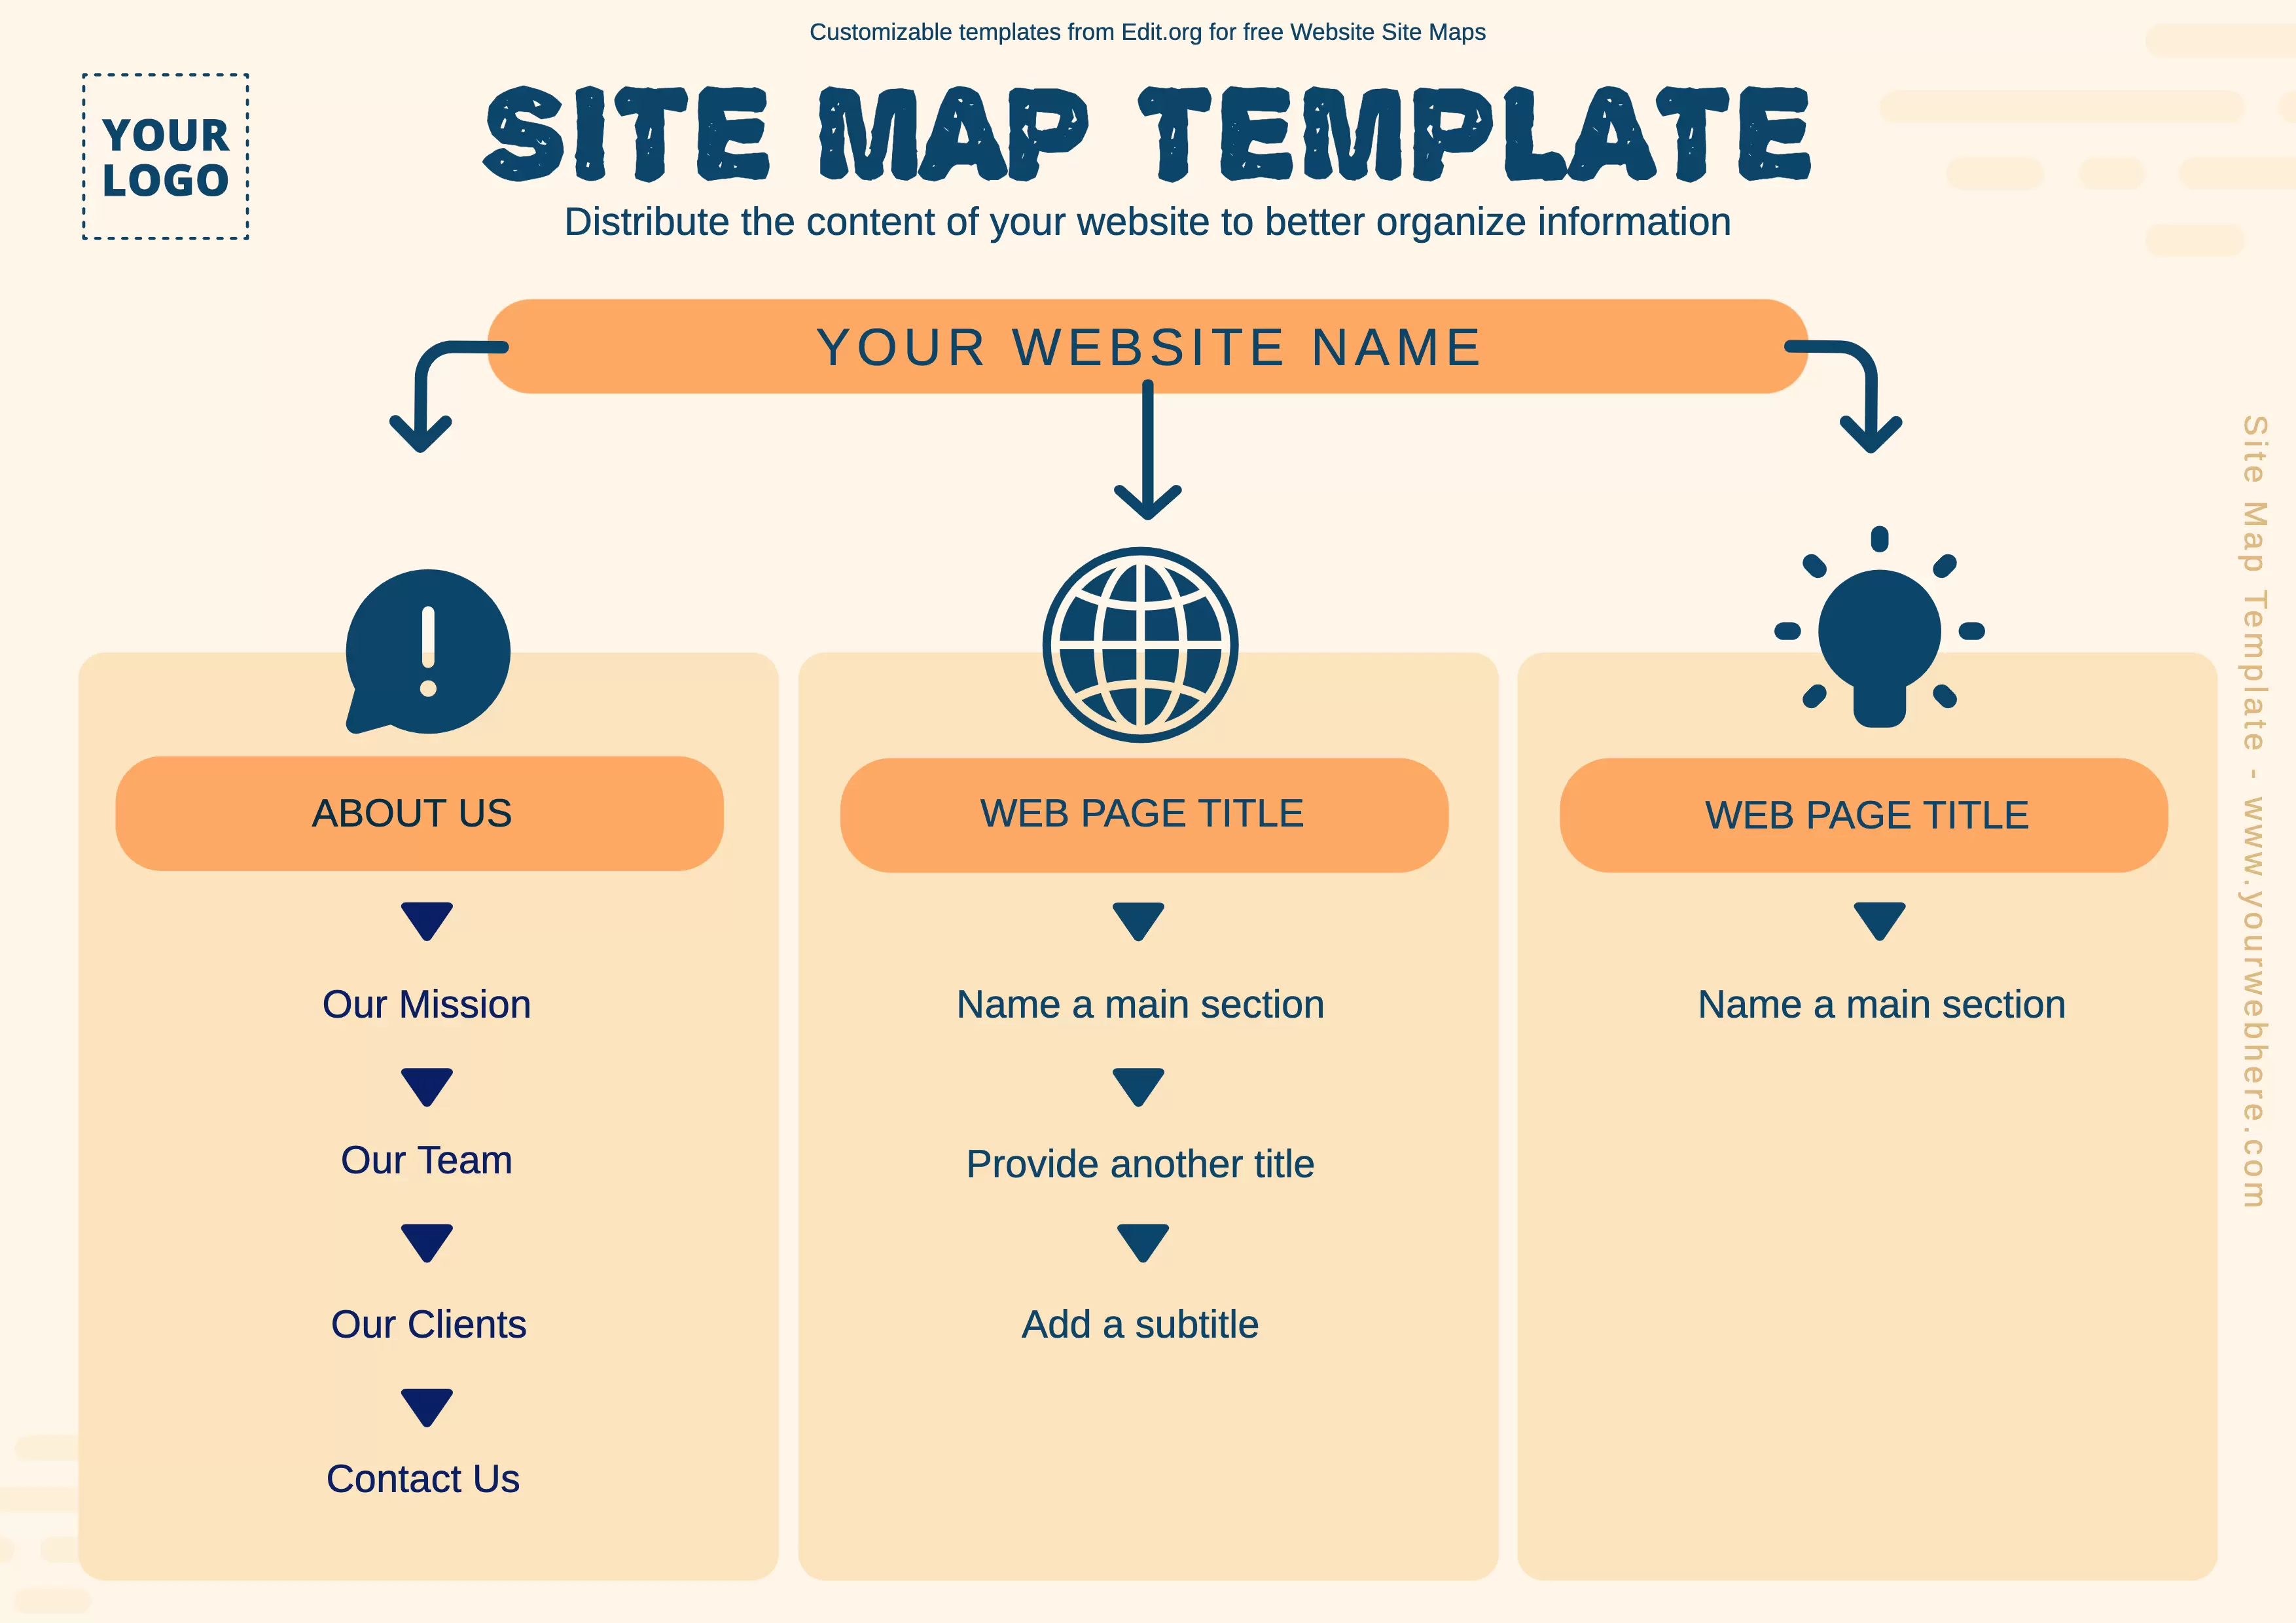 Free editable Website Content Map example template